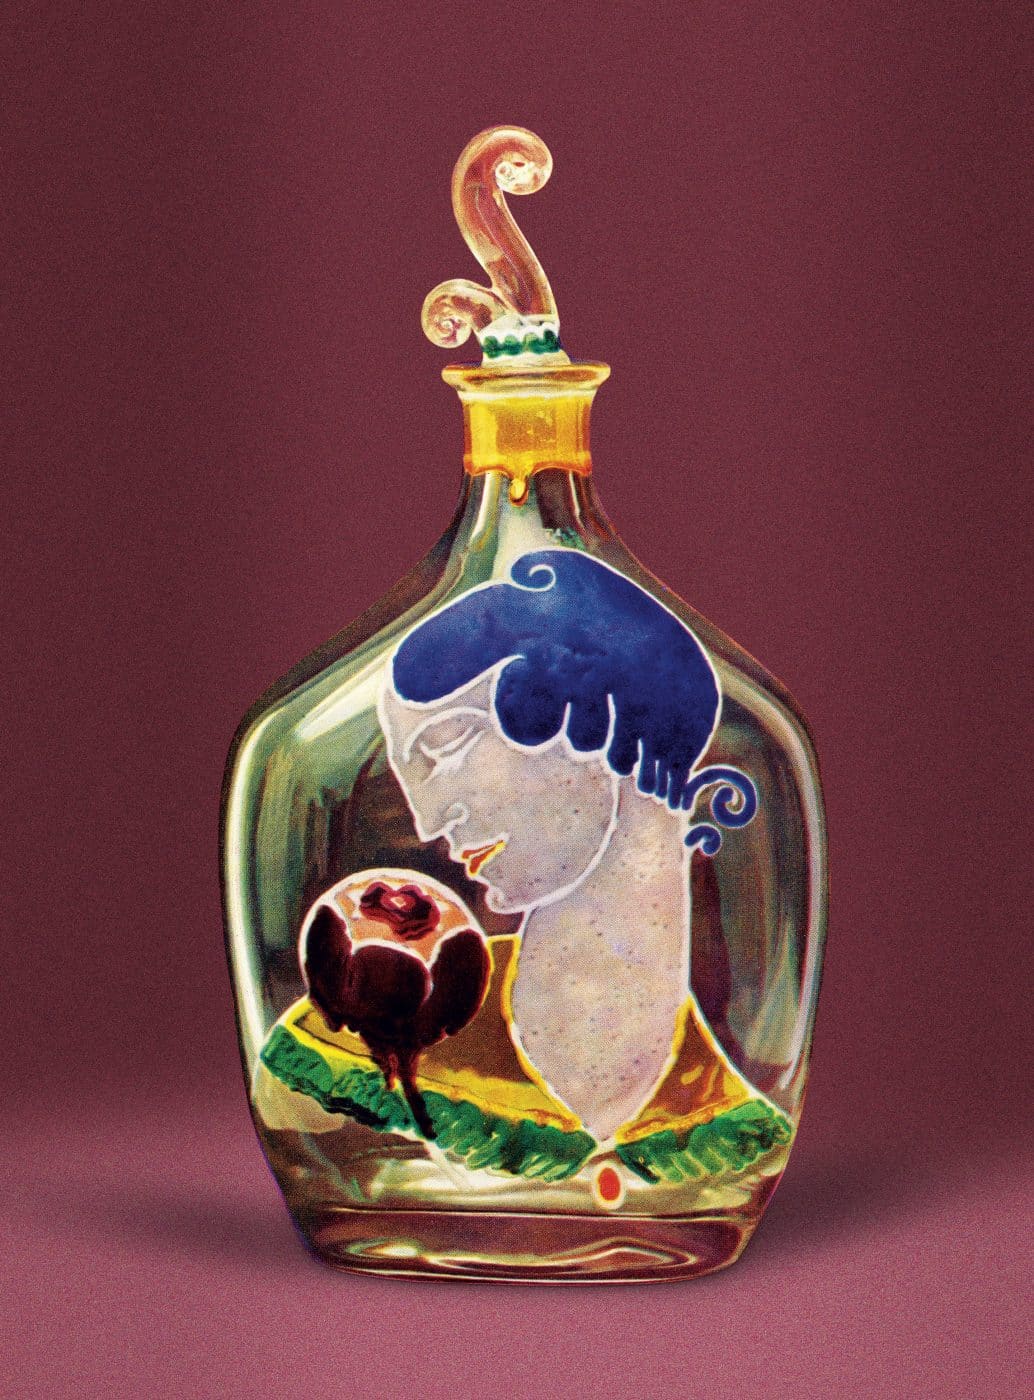 Enameled glass bottle with stopper by Maurice Marinot, published in L’Art Décoratif Français